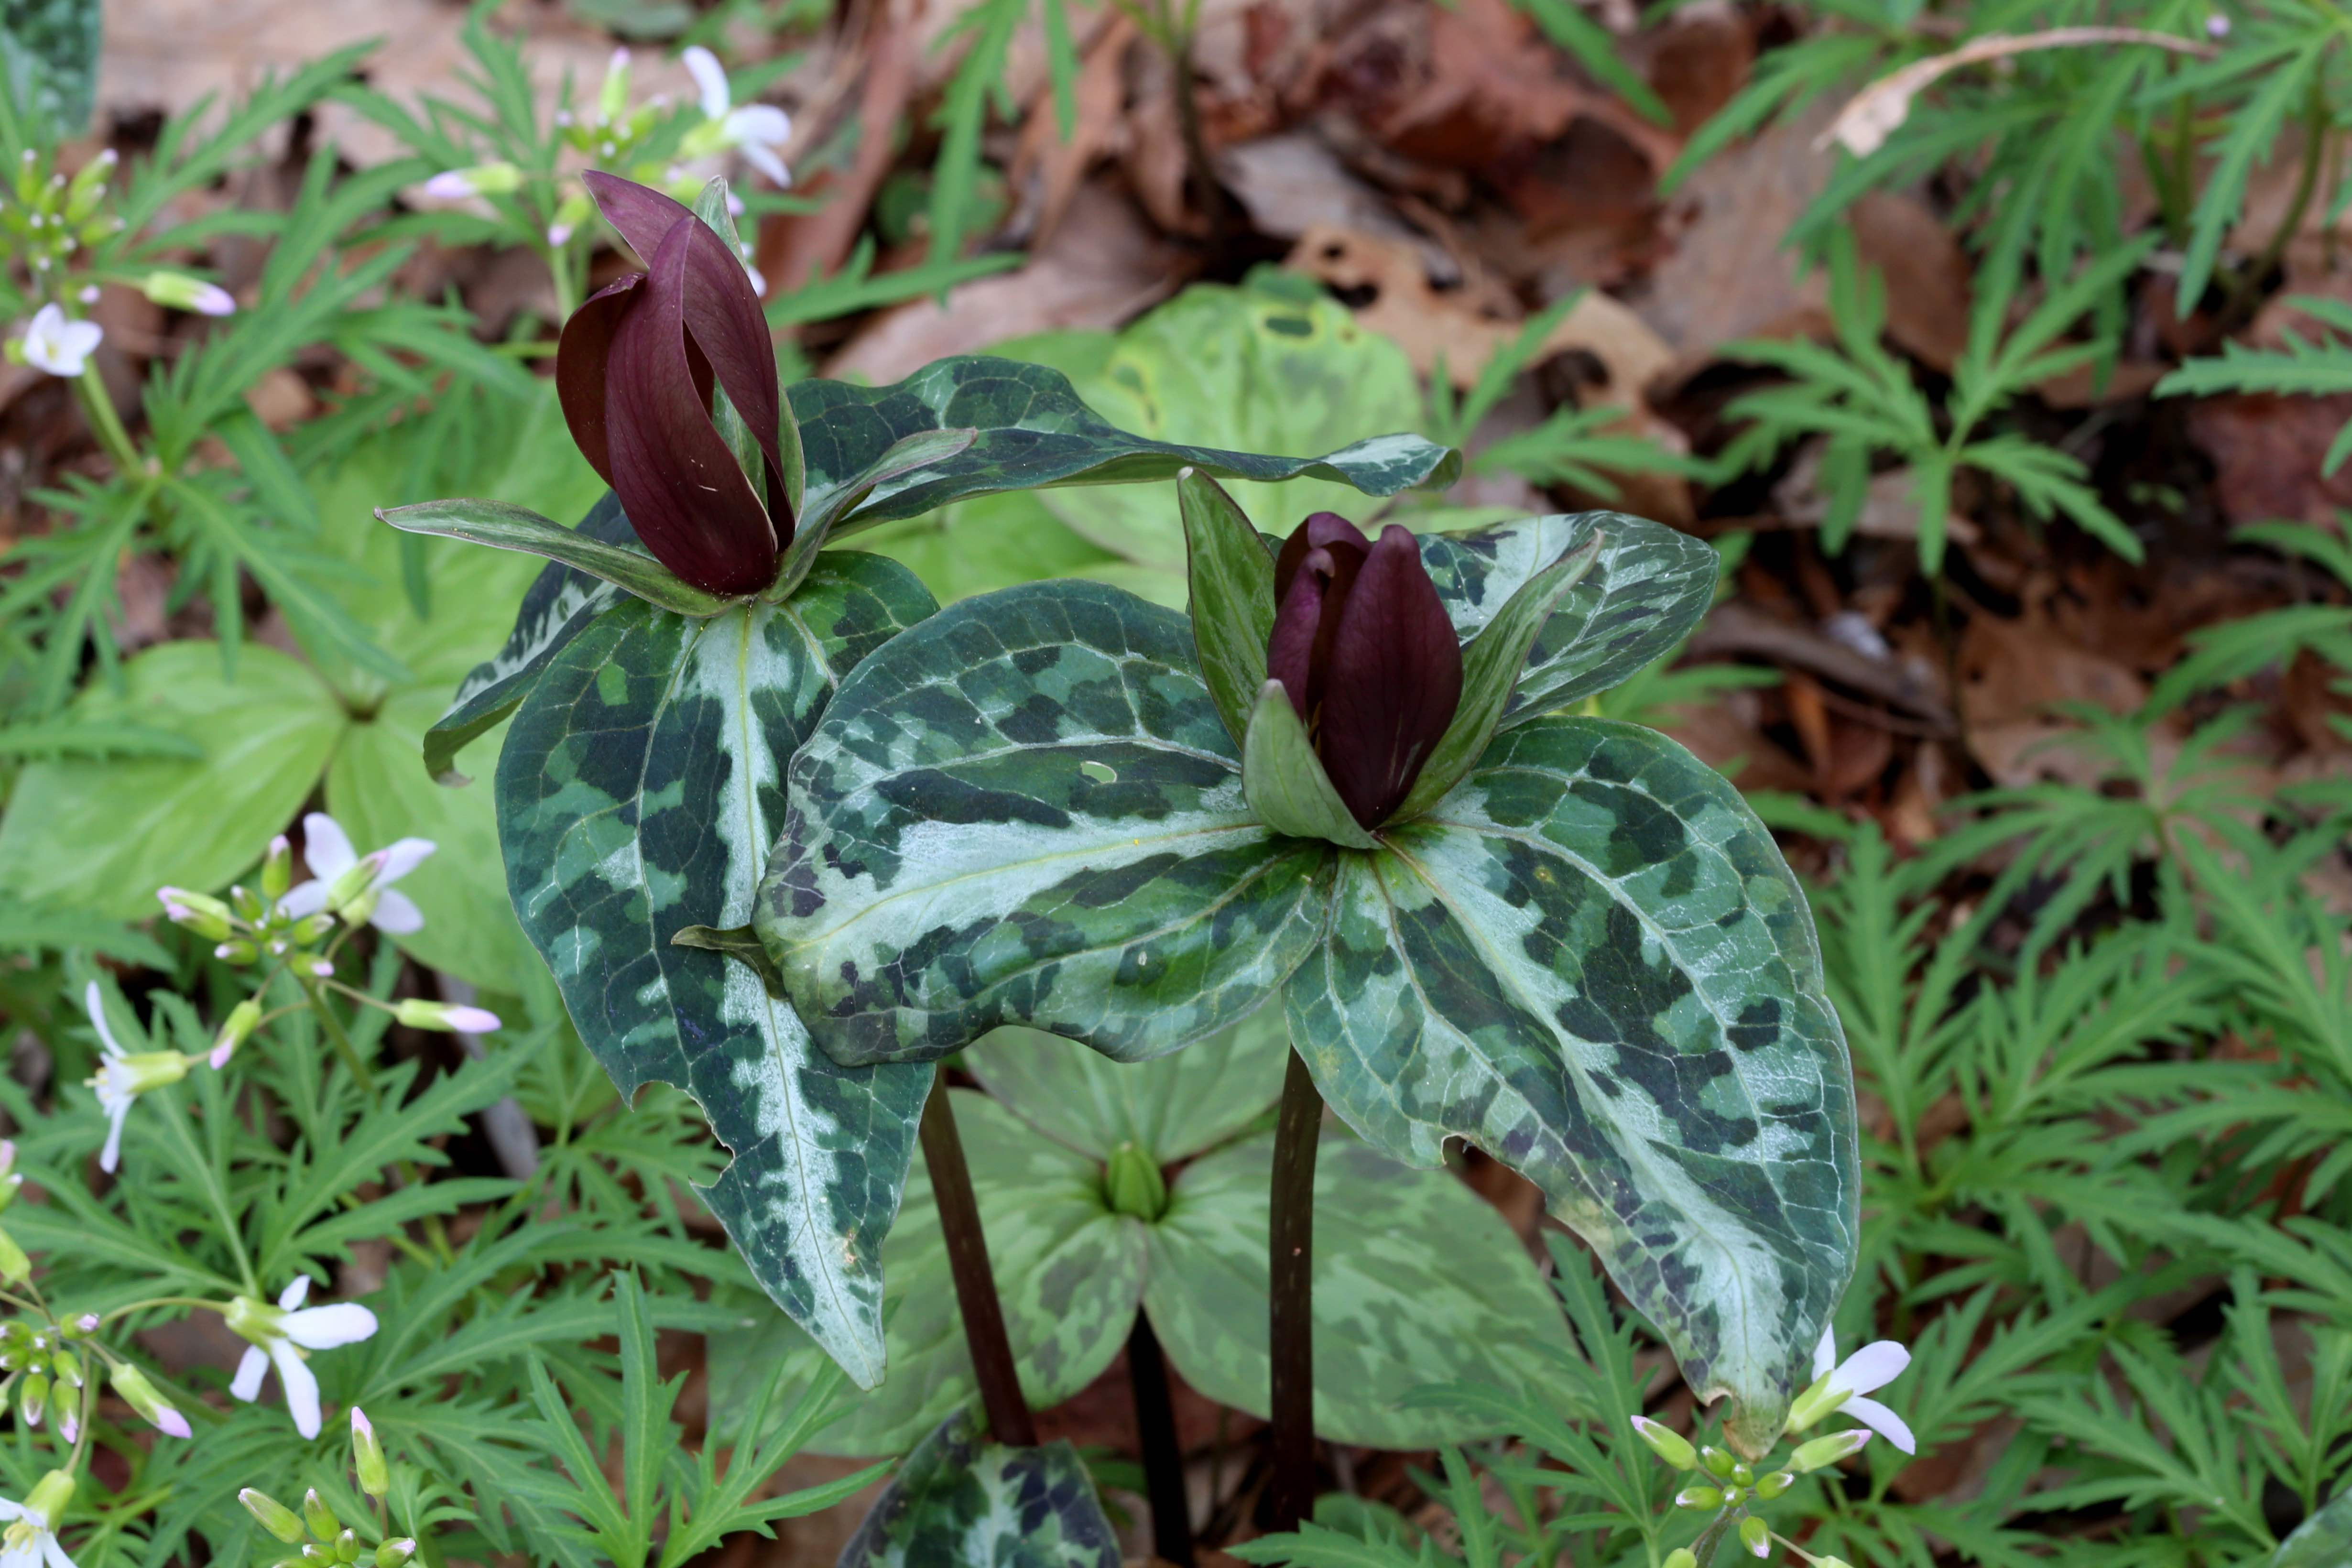 The Scientific Name is Trillium decipiens. You will likely hear them called Chattahoochee Trillium, Chattahoochee River Wakerobin, Deceptive Trillium. This picture shows the A pair of Trillium decipiens in Larry Mellichamp's garden in Charlotte.   of Trillium decipiens